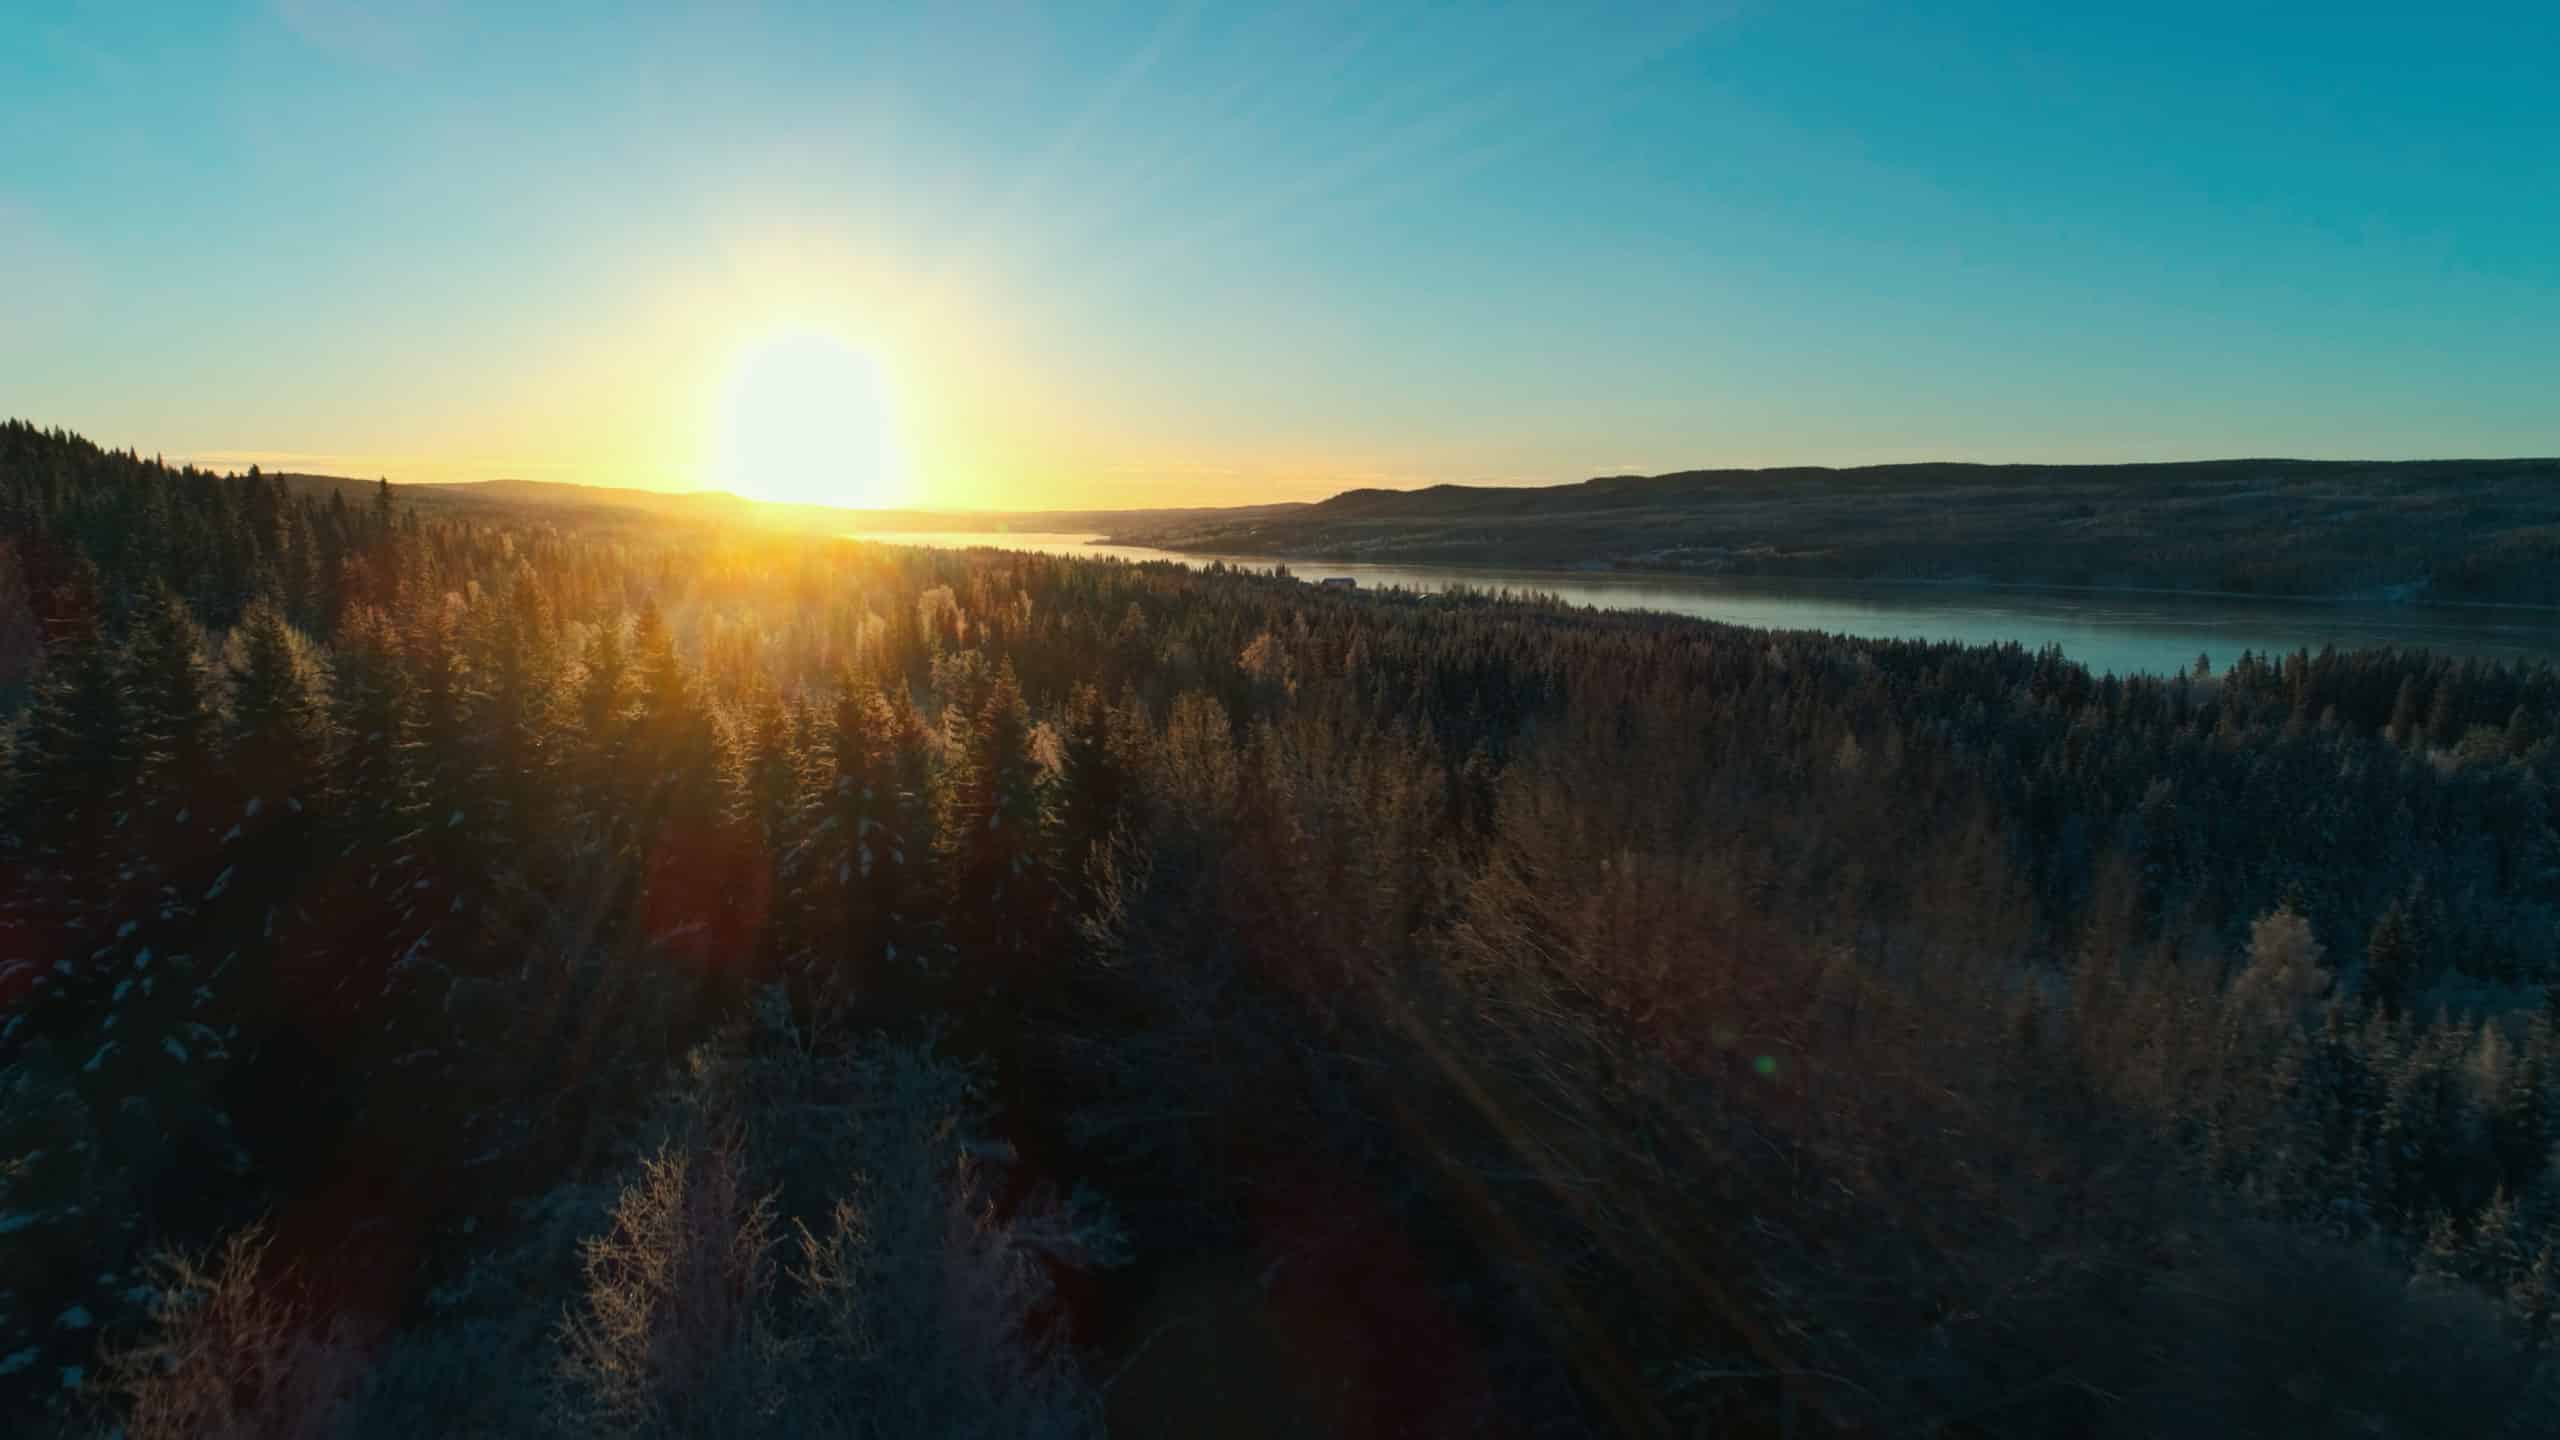 Sun is hanging low over the trees surrounding lake Osensjøen at sunset.